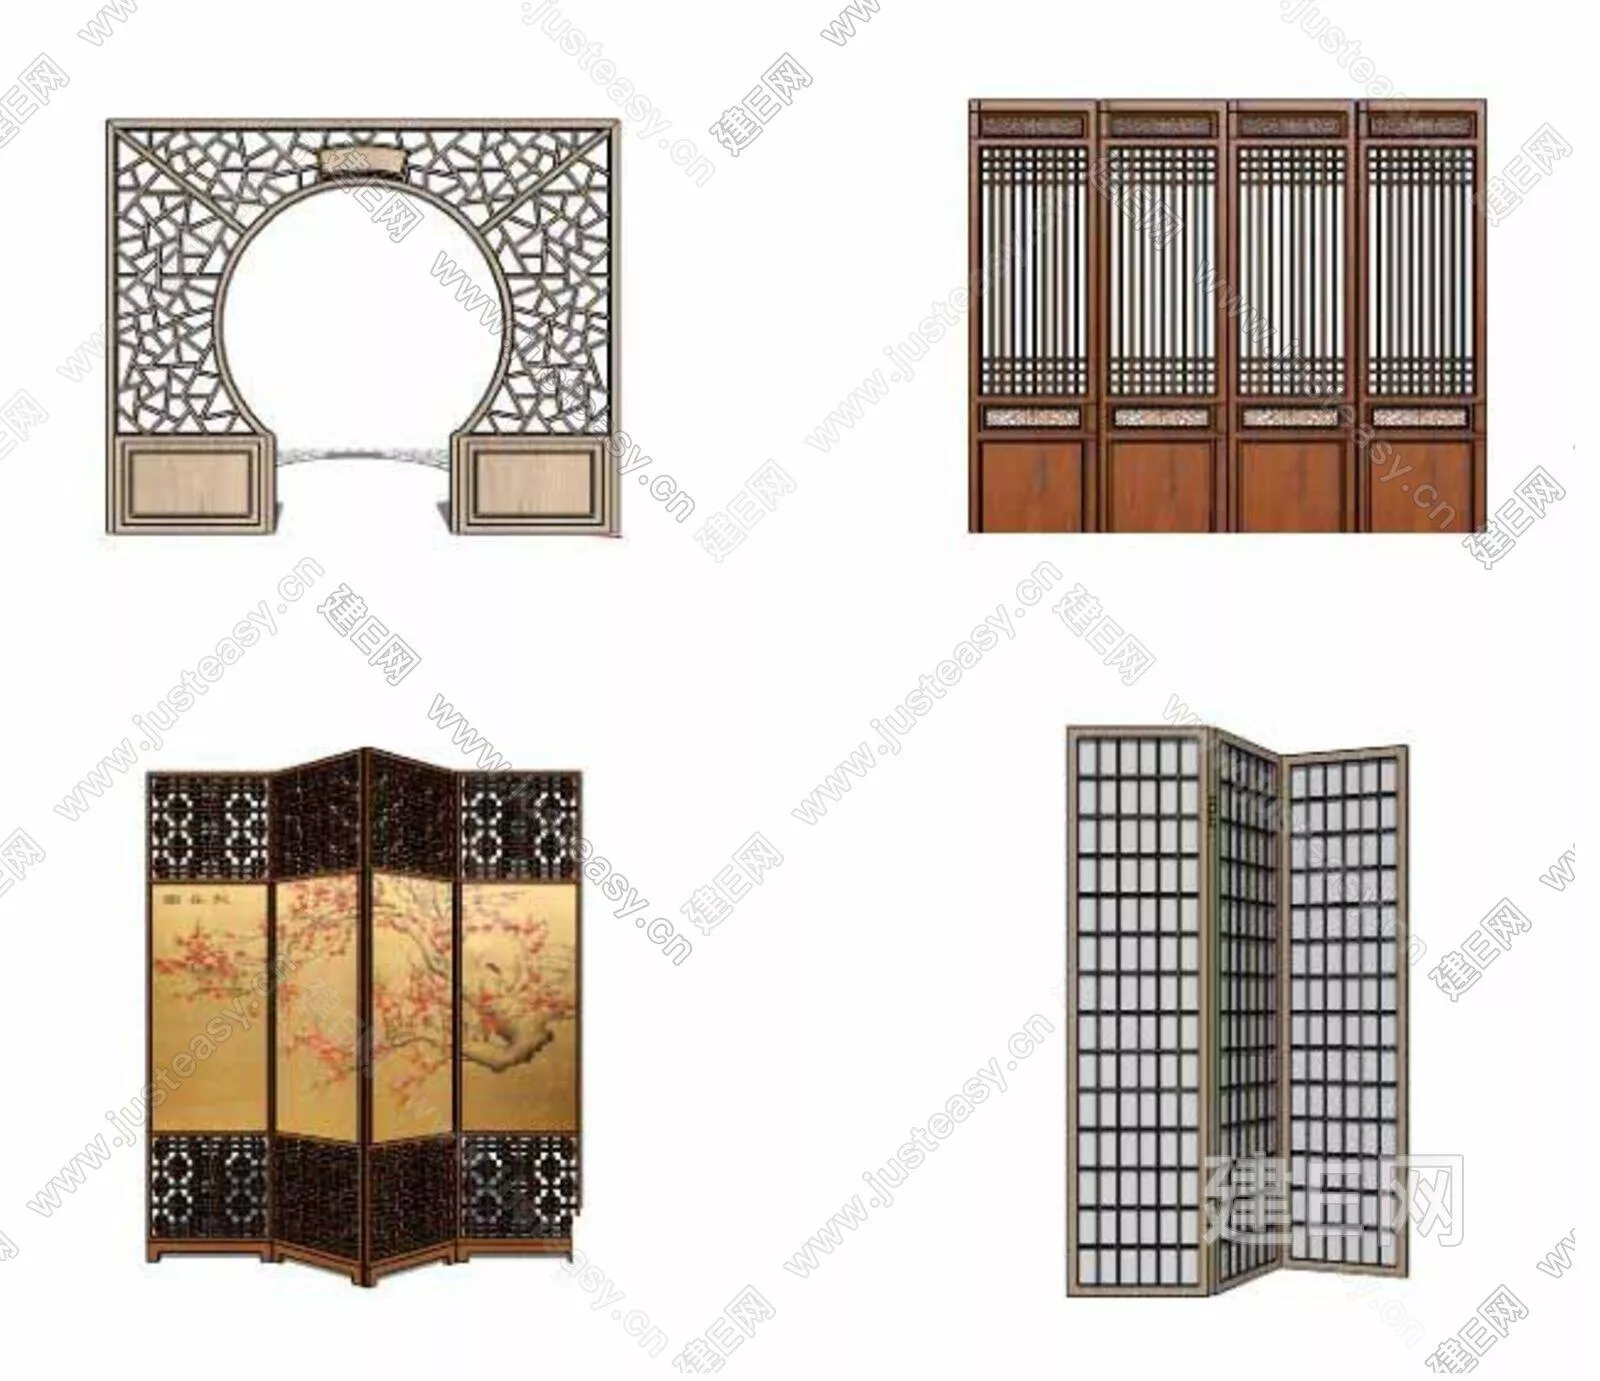 CHINESE PARTITION SCREEN - SKETCHUP 3D MODEL - ENSCAPE - 111886607